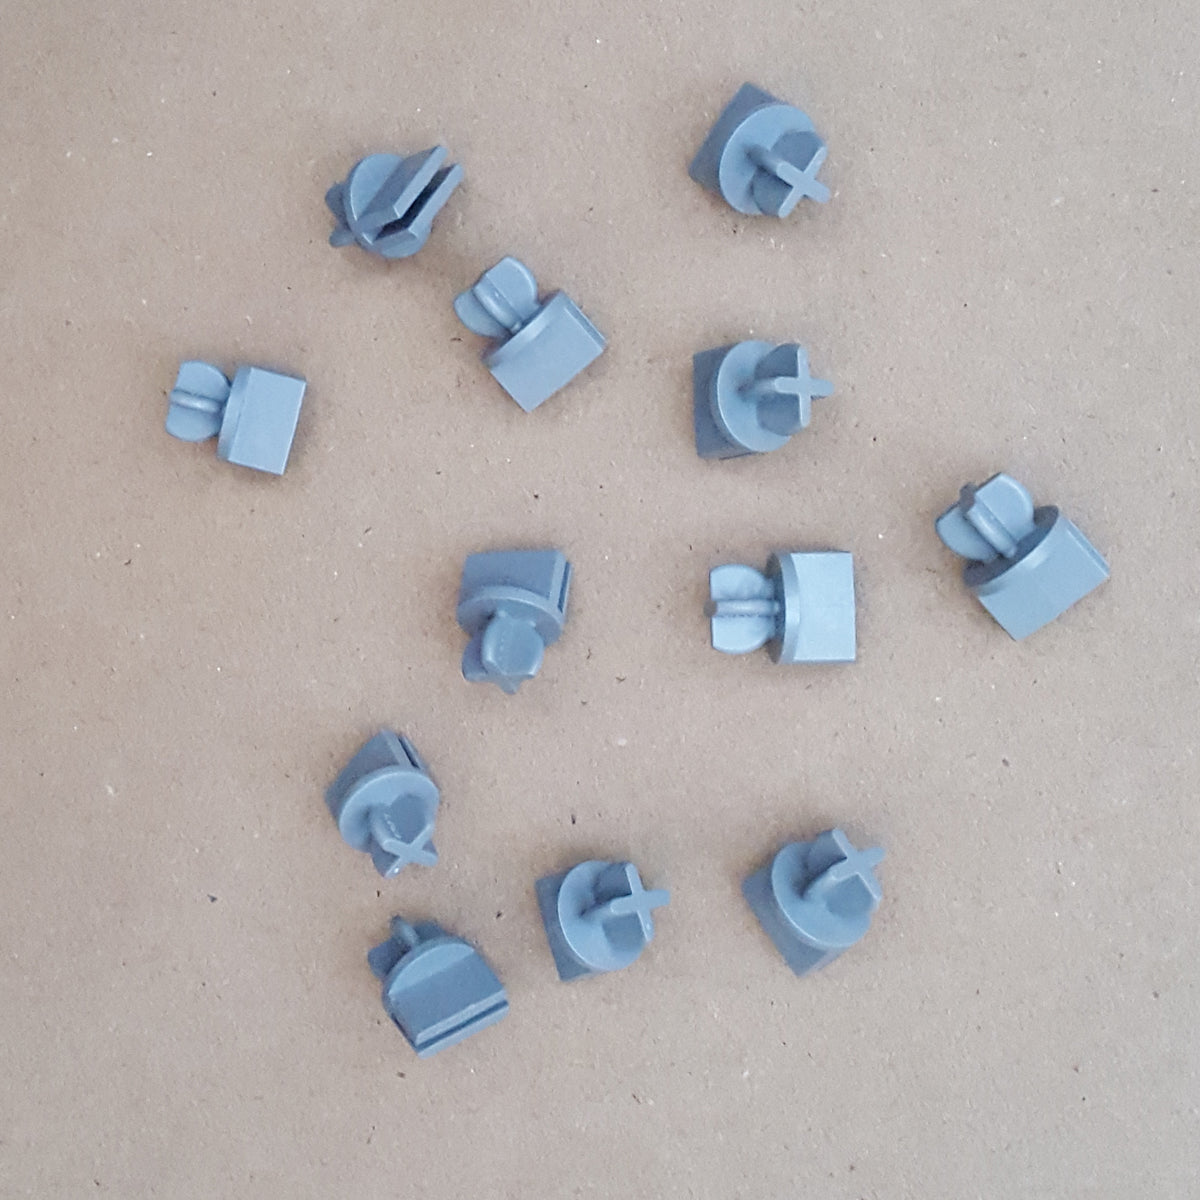 Scalextric 1:32 Classic - C8226 Track Support Clips / Connectors - Grey x 12